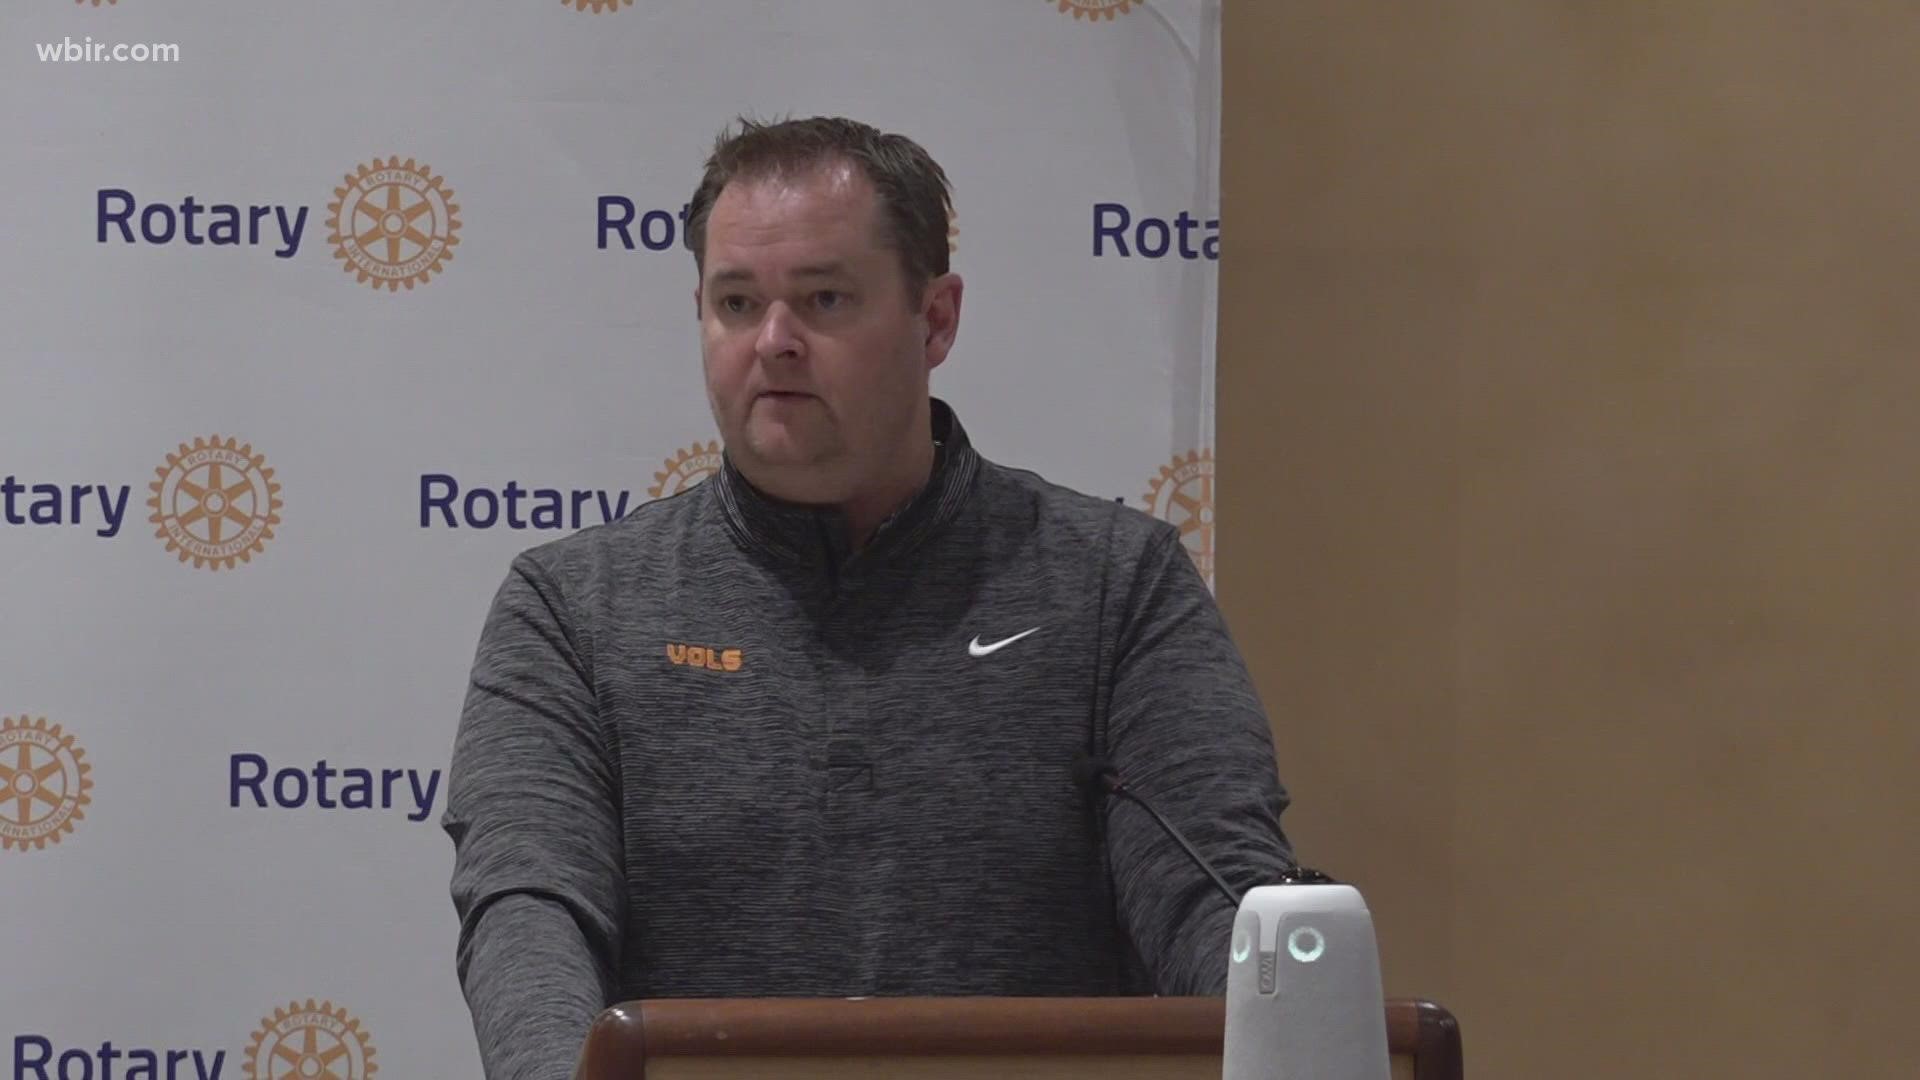 Tennessee's head football coach spoke about leadership and how the Vols are growing in an appearance in downtown Knoxville.